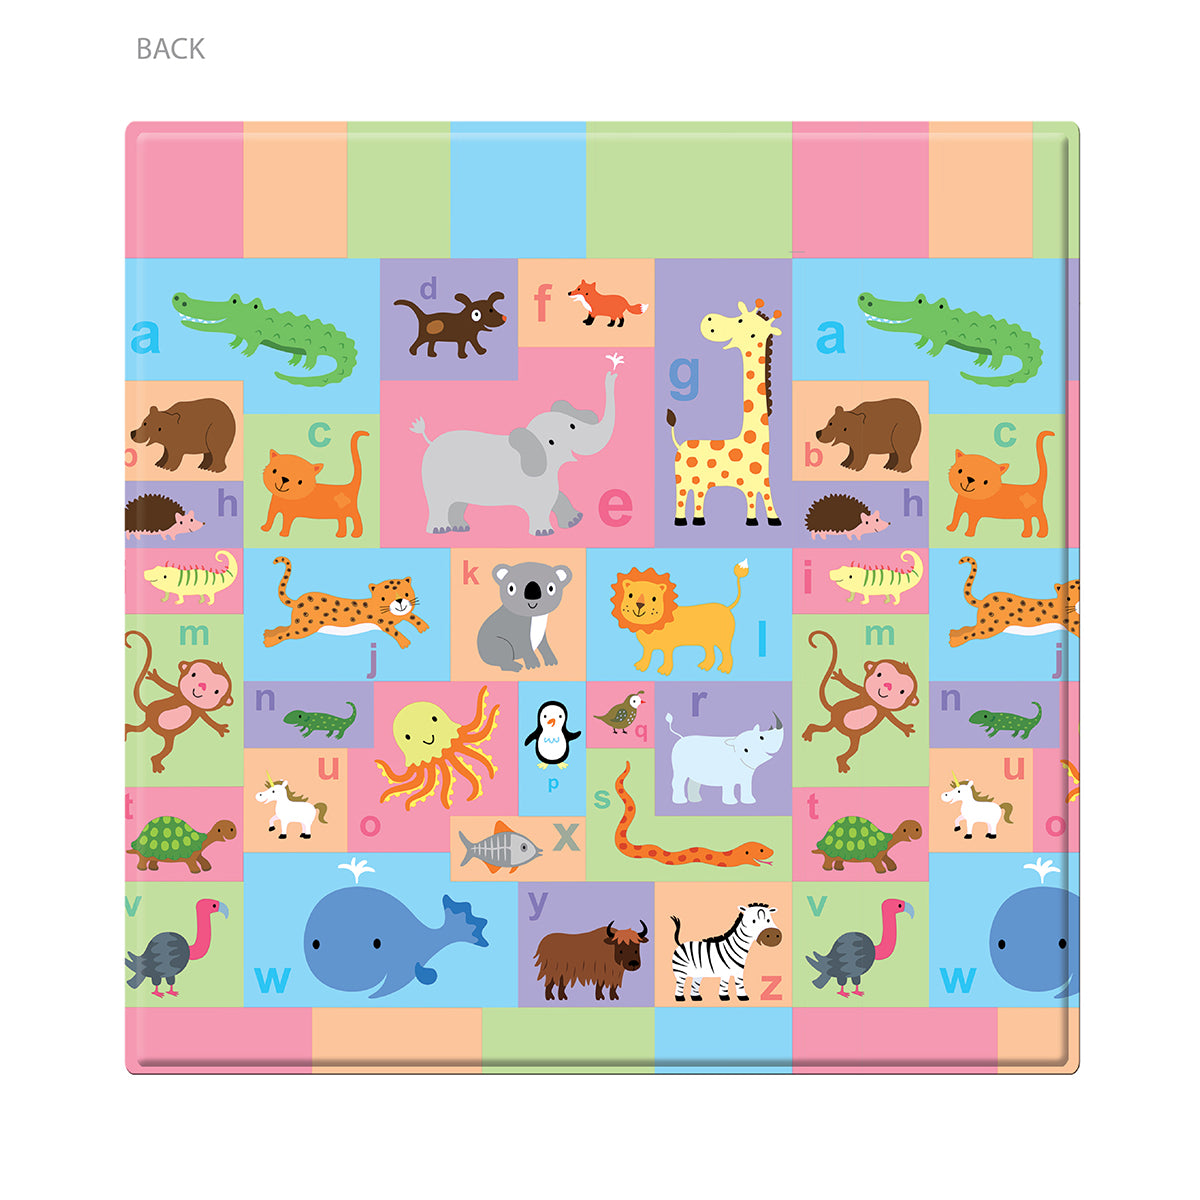 Busy Farm Babycare Reversible Playmat - Small